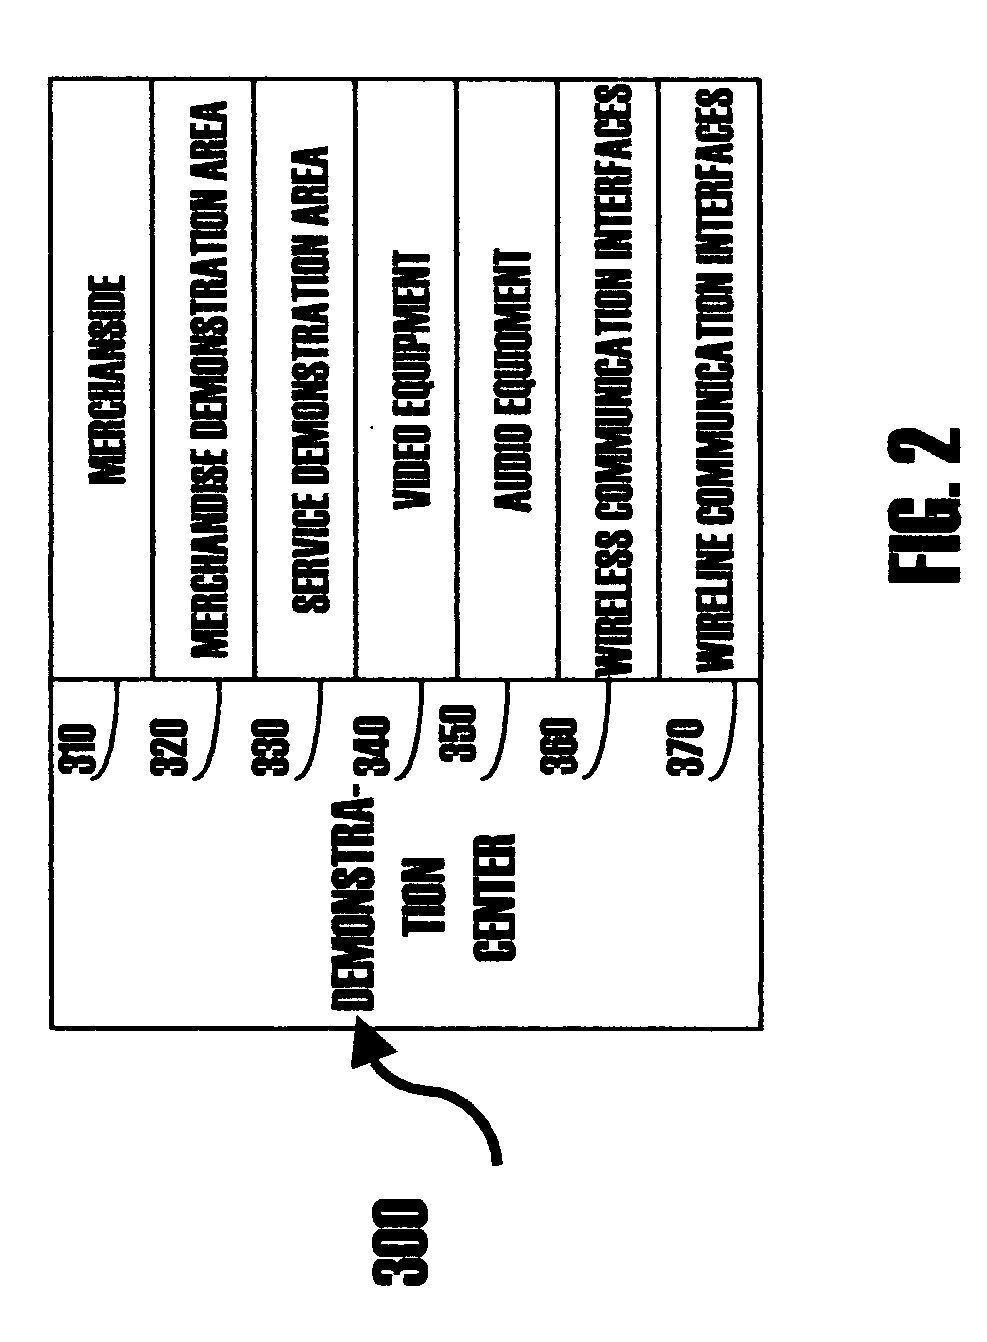 System and method for delivering real time remote buying, selling, meeting, and interacting in a virtual reality environment